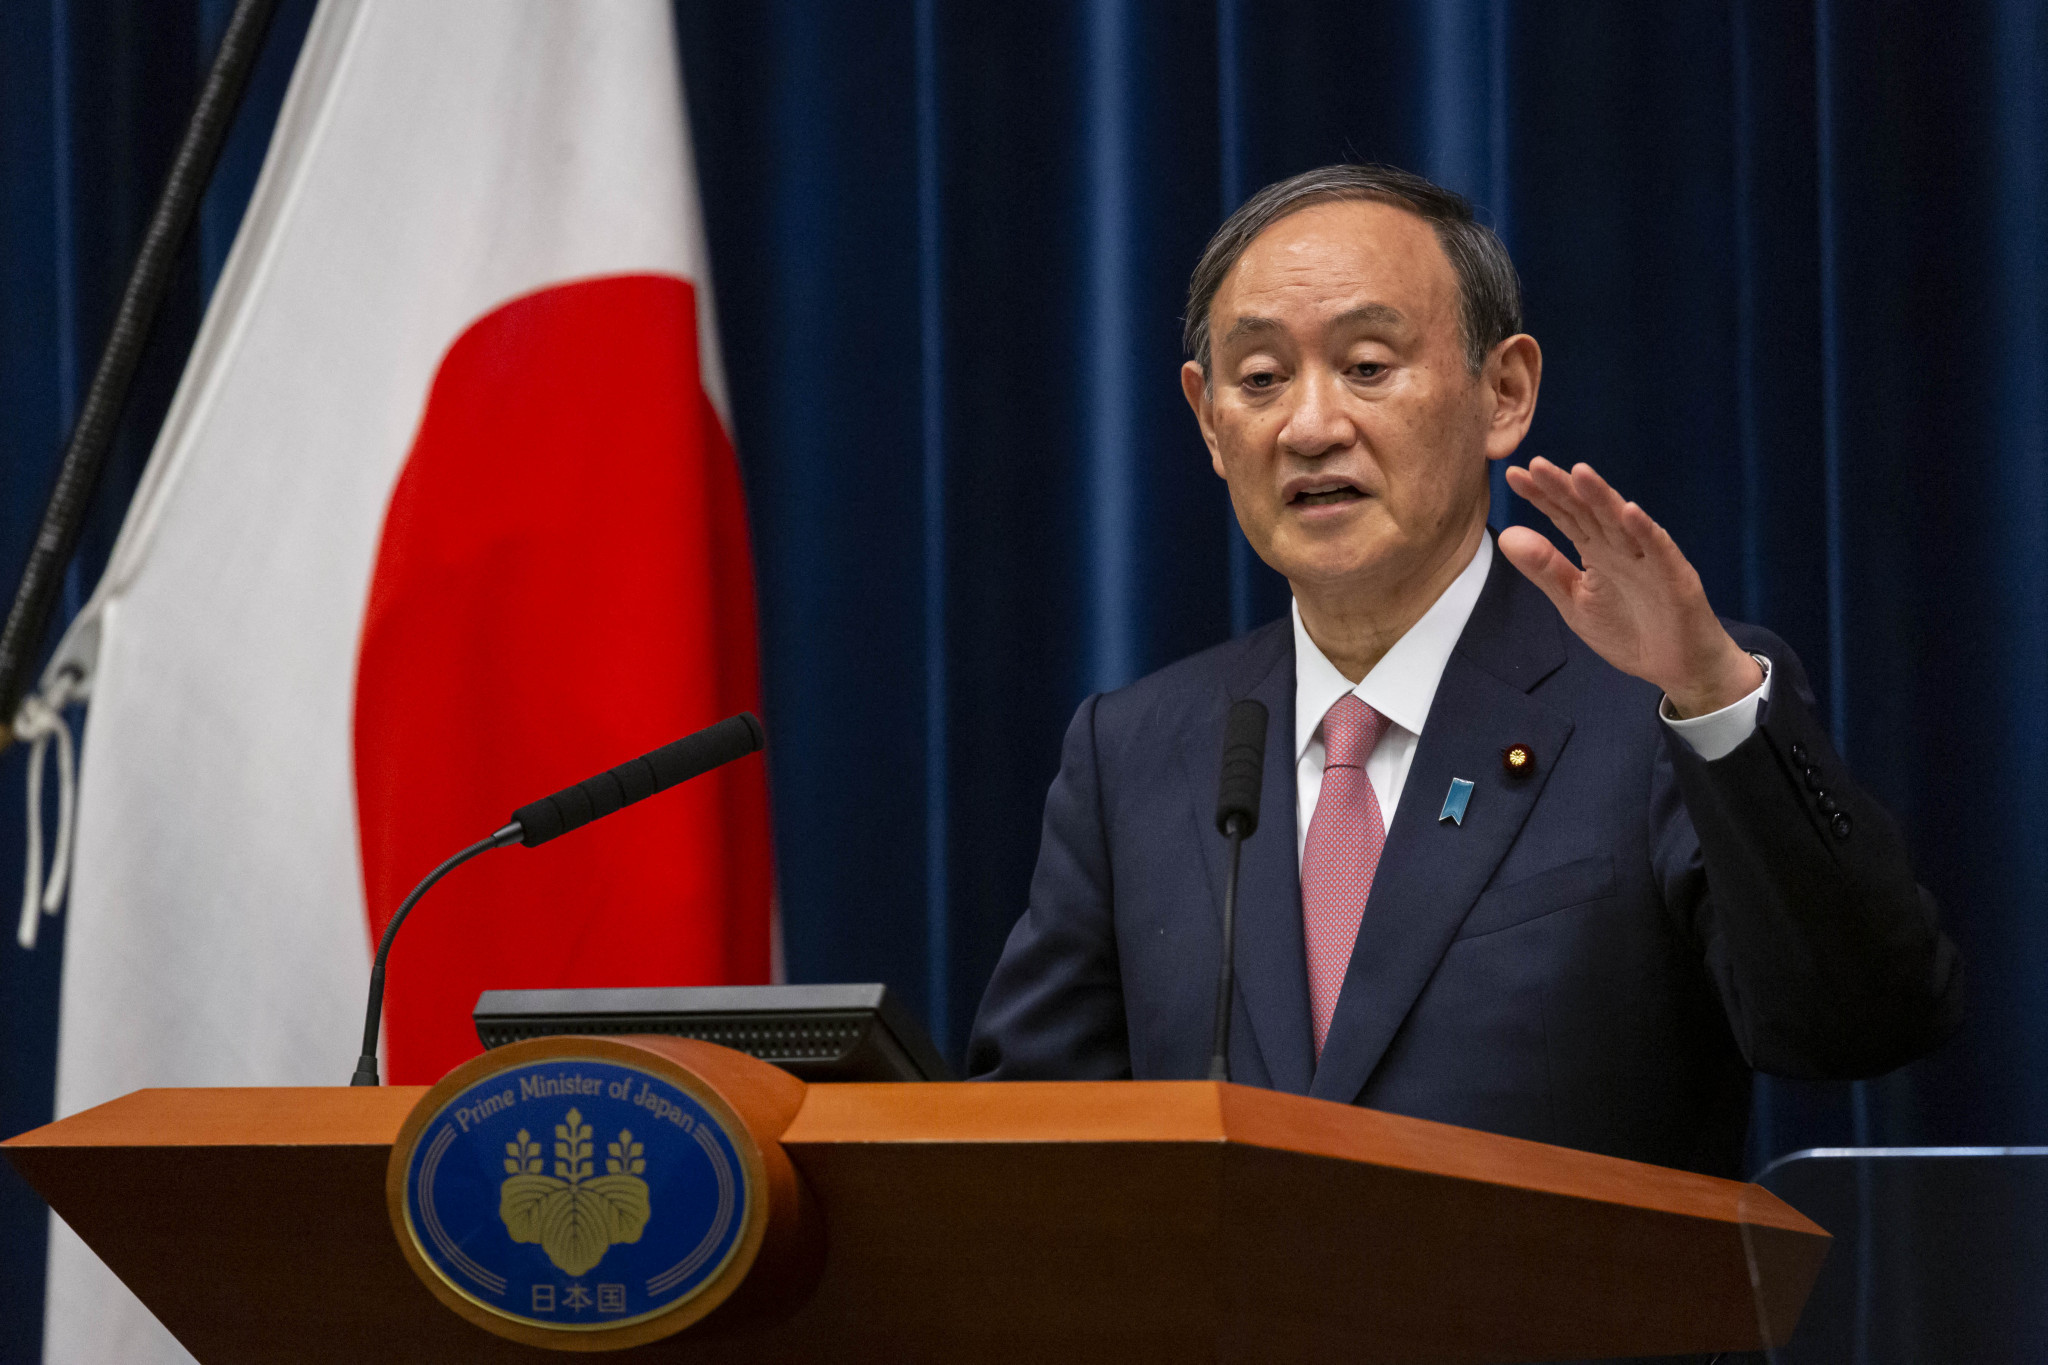 Japanese Prime Minister Yoshihide Suga is pressing ahead with Tokyo 2020, despite public opposition and an election looming ©Getty Images